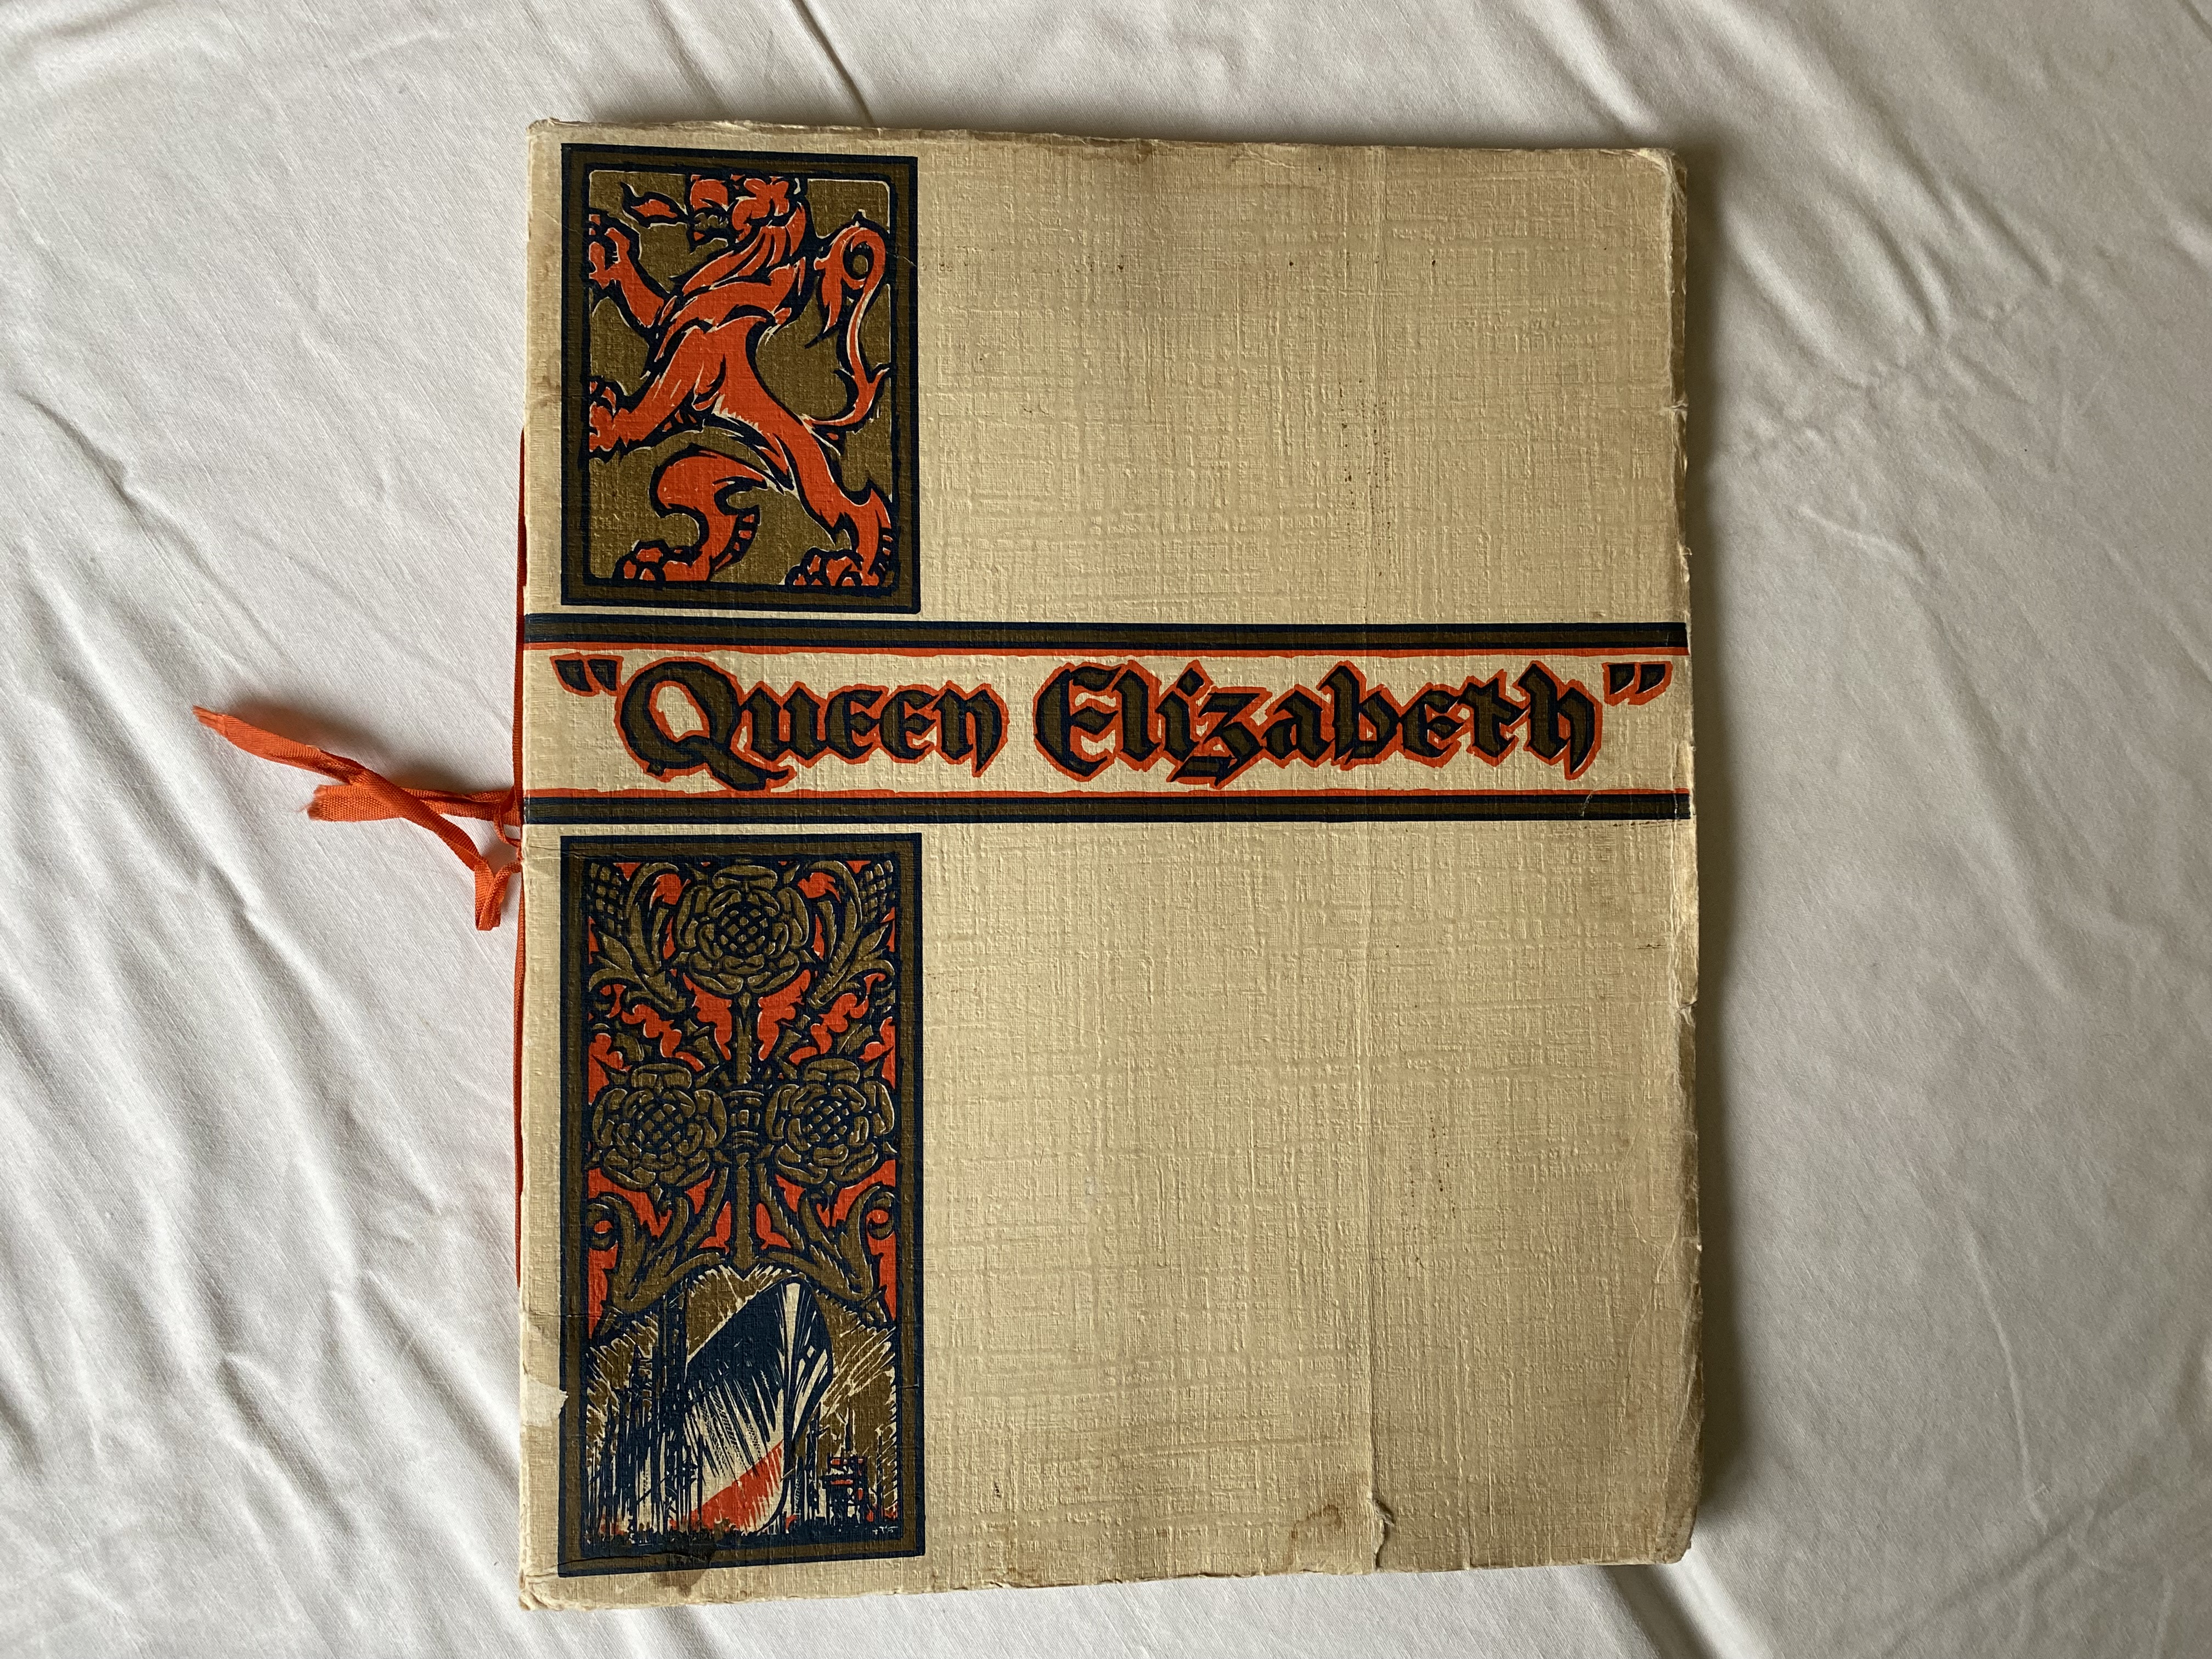 AN ORIGINAL NAMING CEREMONY/LAUNCH BOOKLET FOR THE RMS QUEEN ELIZABETH FROM 1938